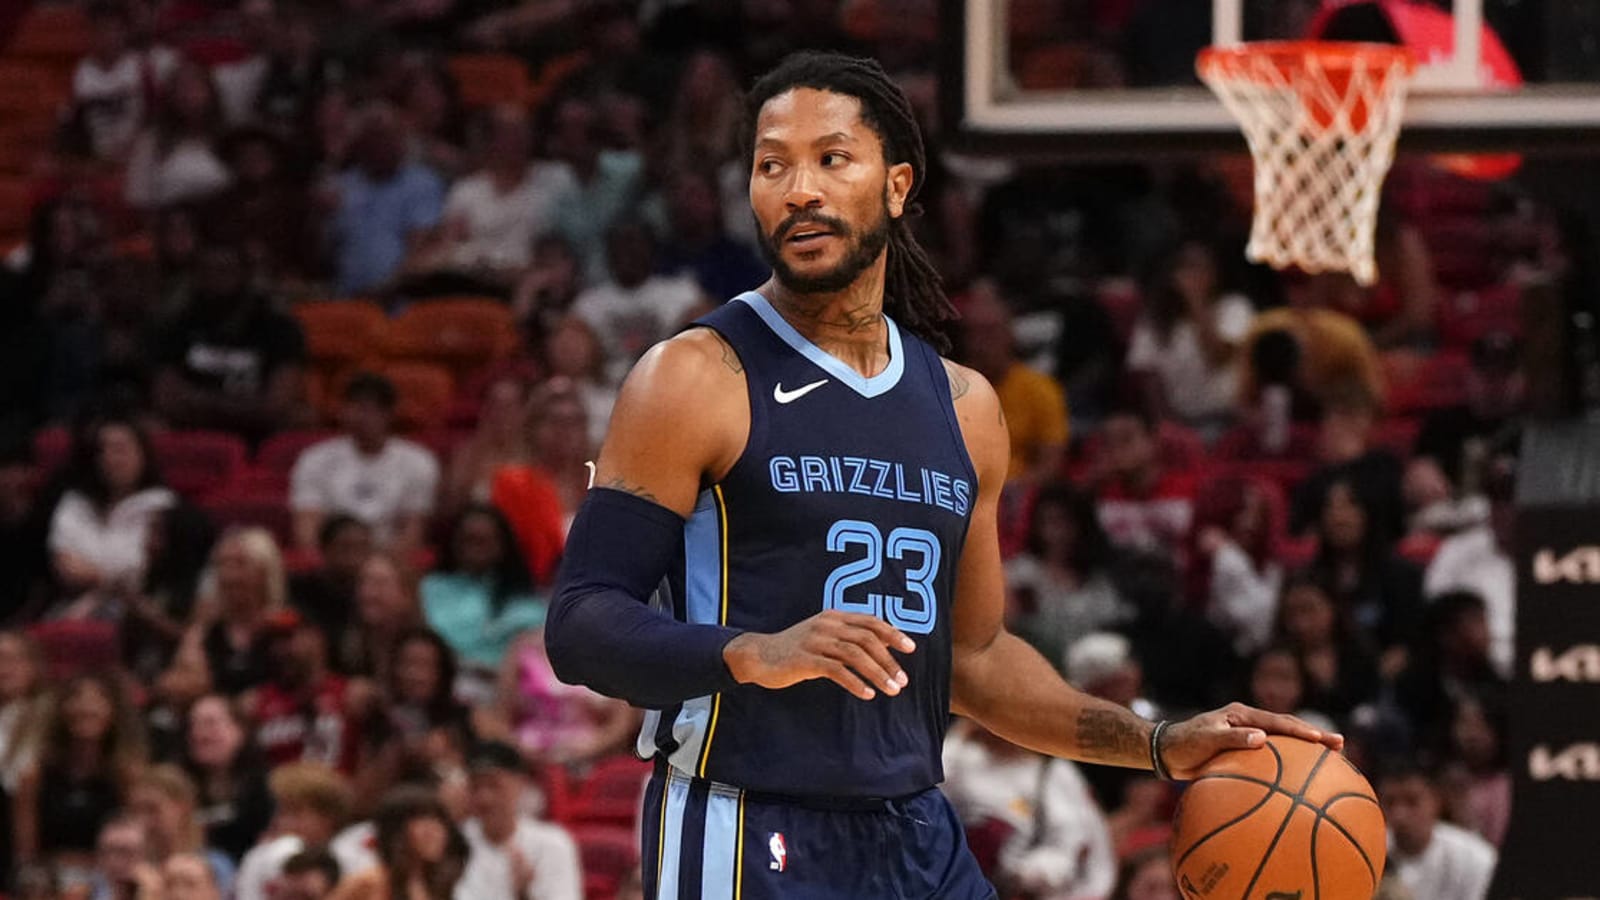 Grizzlies guard to miss at least one week